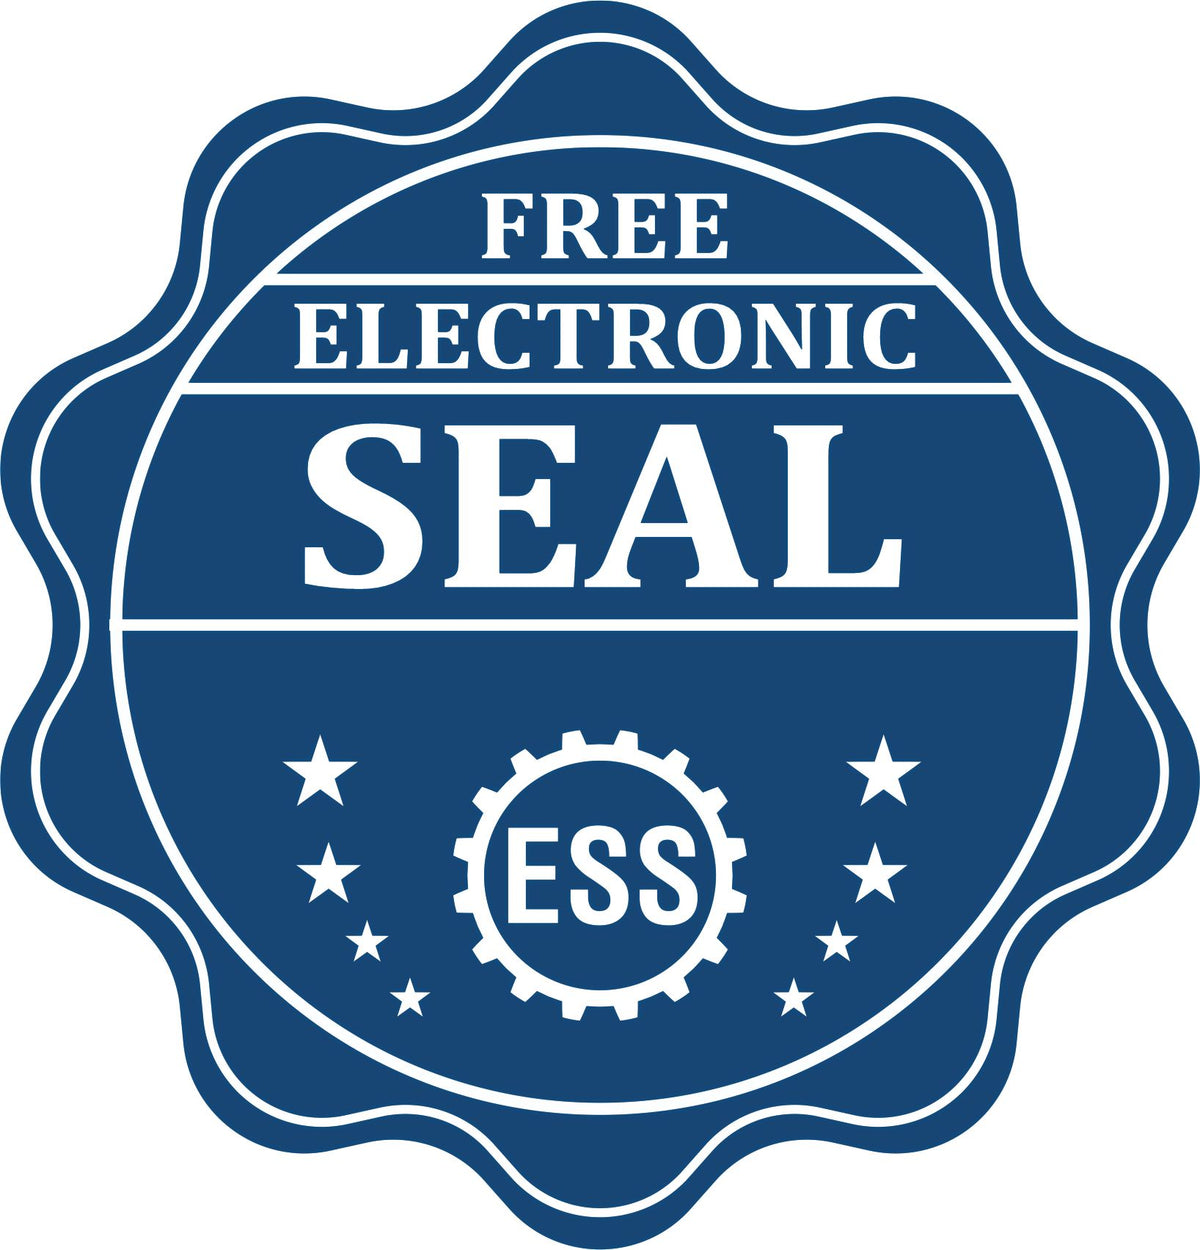 A badge showing a free electronic seal for the State of Alaska Extended Long Reach Engineer Seal with stars and the ESS gear on the emblem.